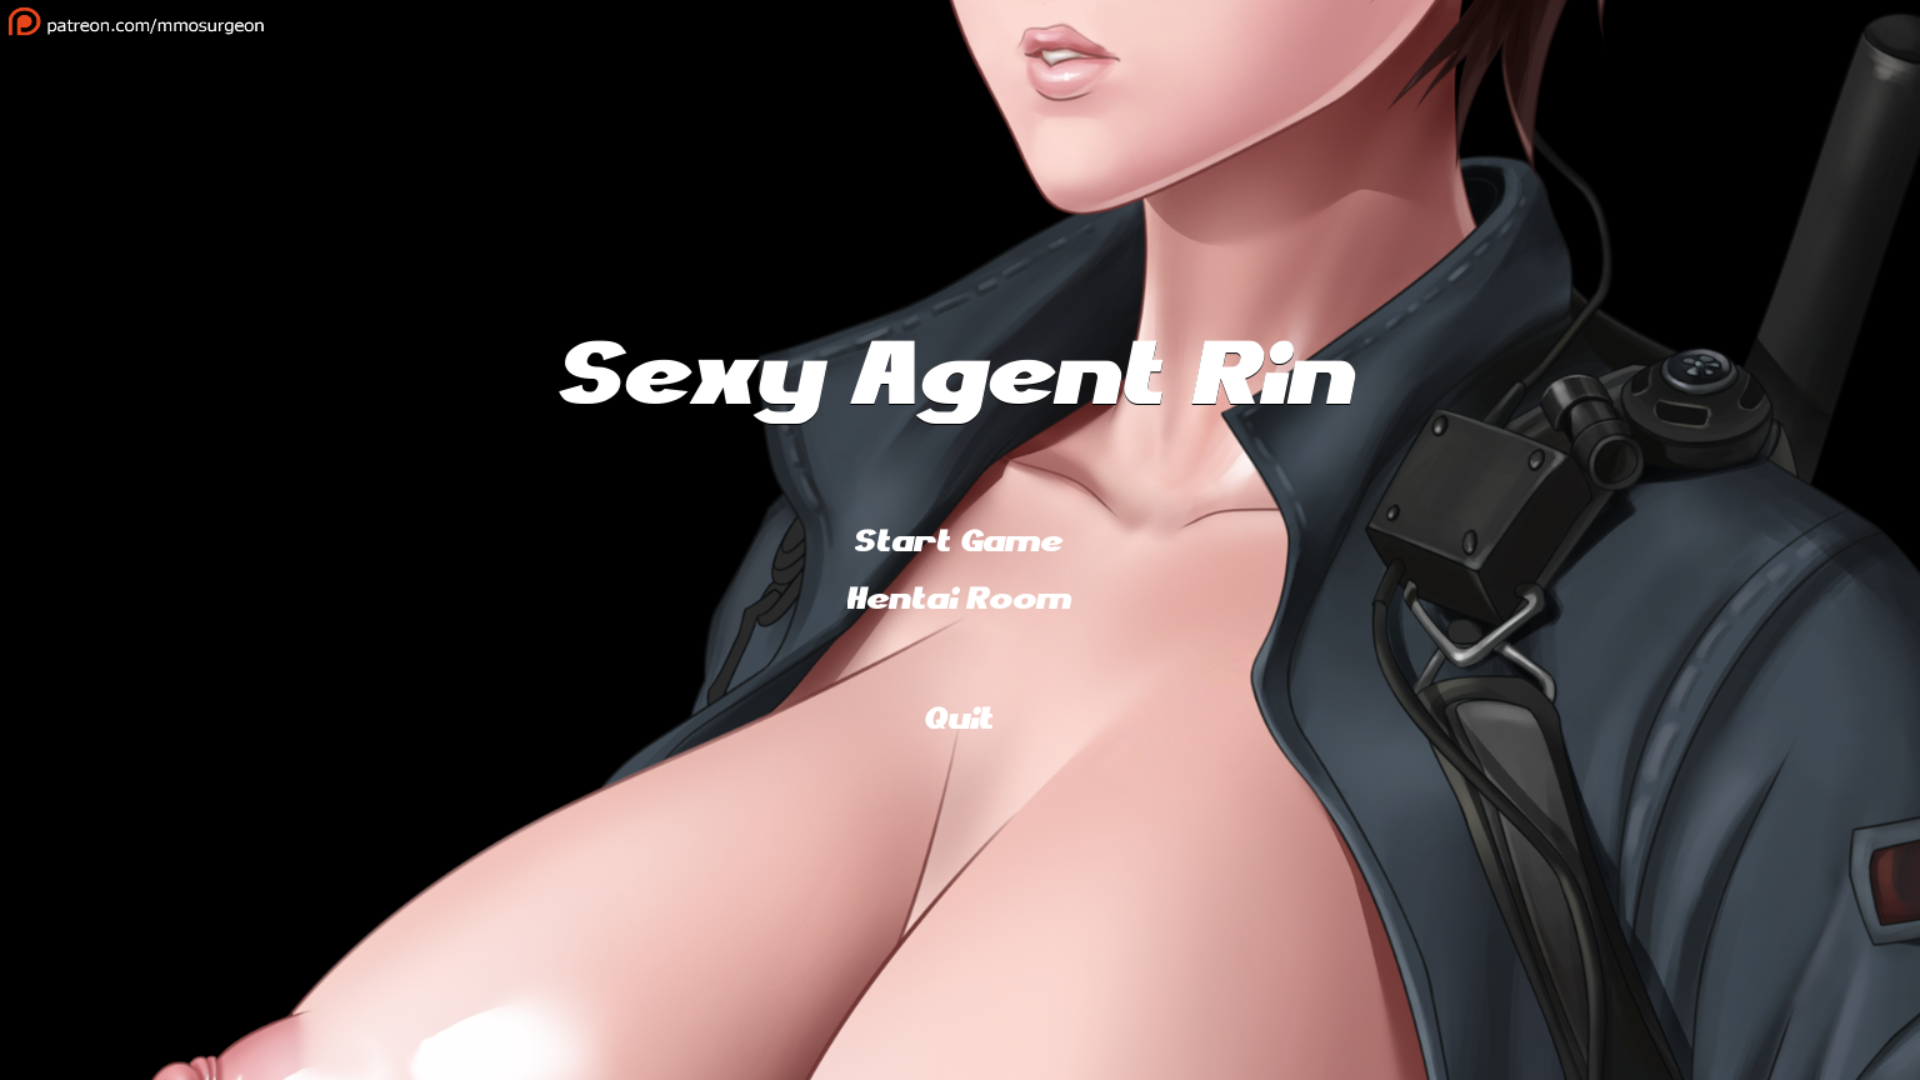 1920px x 1080px - Hentai Shooter - Sexy Agent Rin [COMPLETED] - free game download, reviews,  mega - xGames